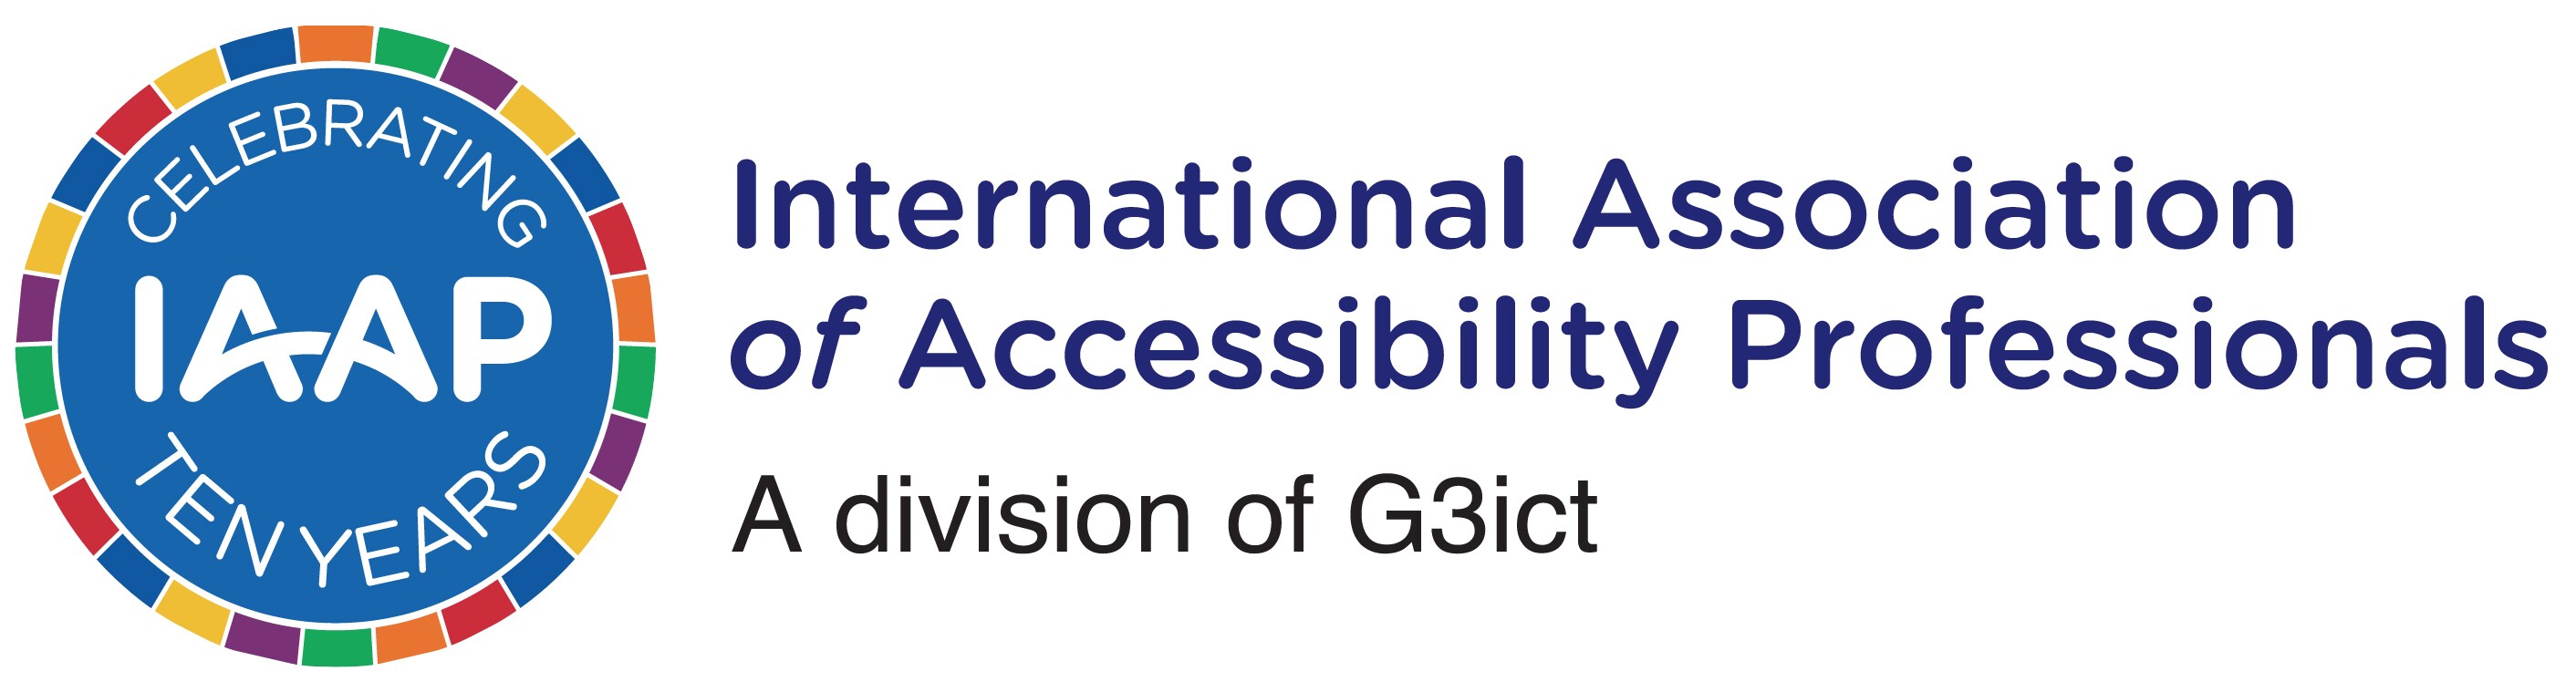 International Association of Accessibility Professionals 